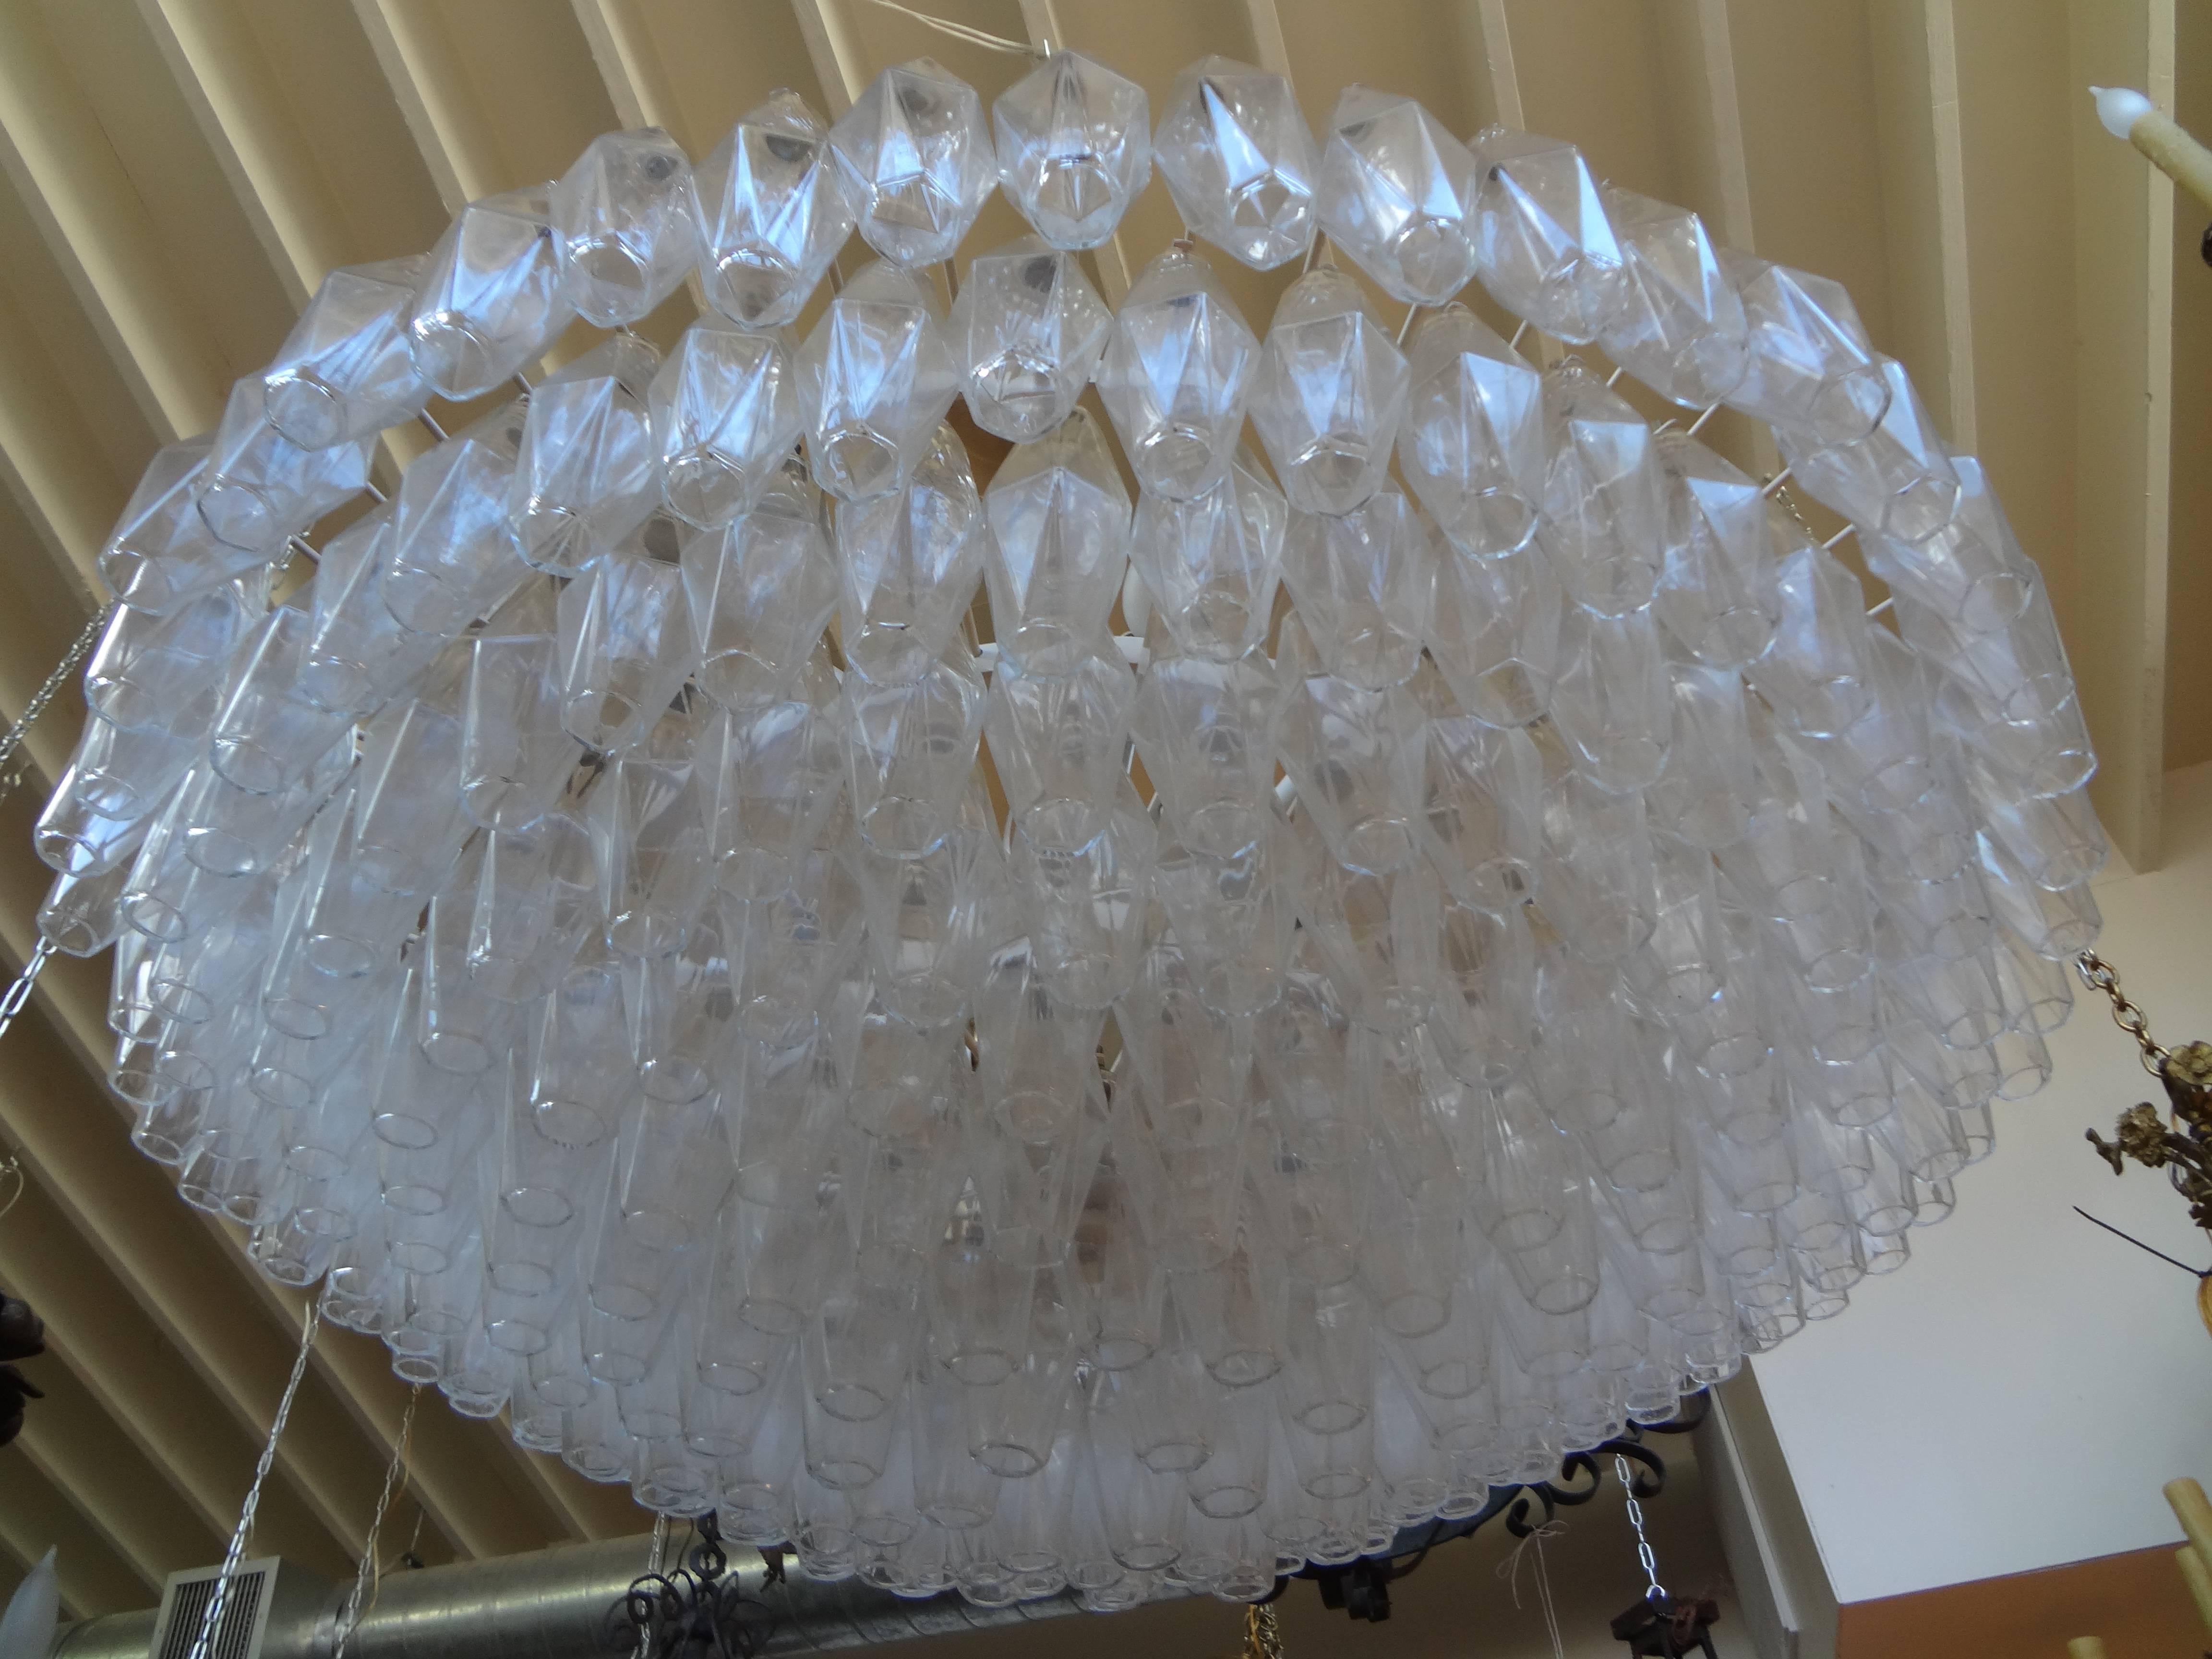 Chic Venini murano glass chandelier with individually hung hand blown polyhedron clear glass shades. This Murano chandelier is newly wired for the U.S. market.
Measures: Glass portion 43 inches D and 18 inches H.
Includes original 40 inch heavy